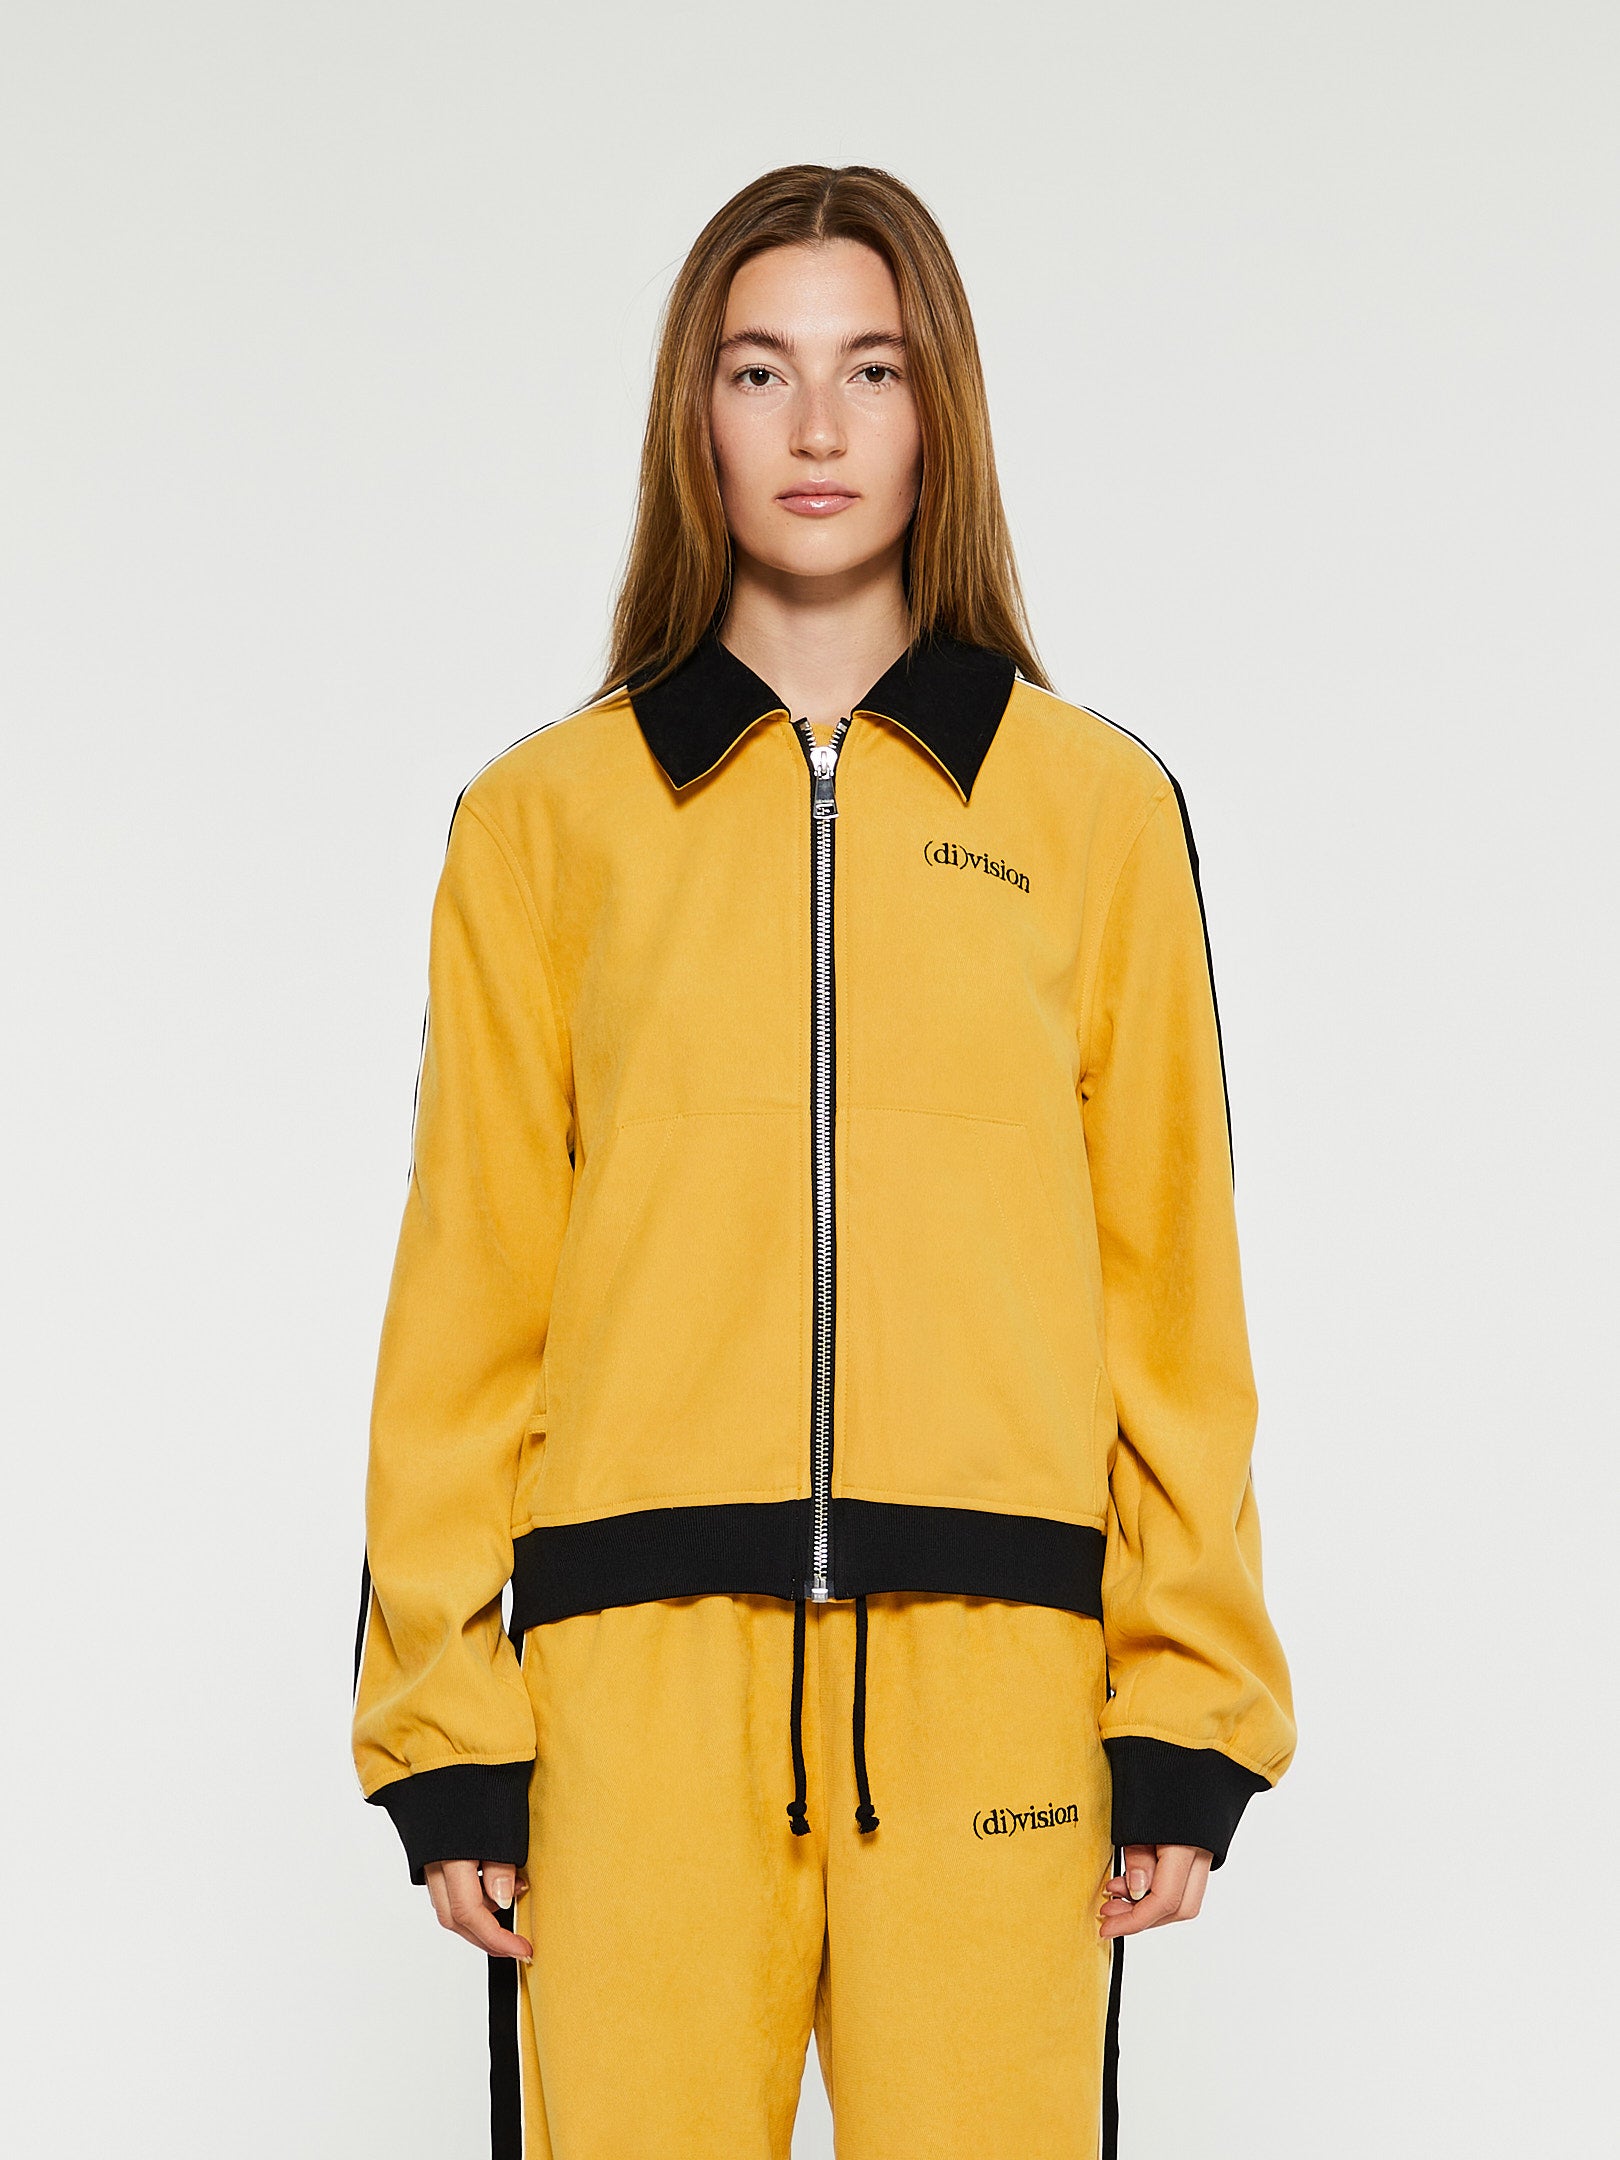 (di)vision - Track Corduroy Jacket in Yellow